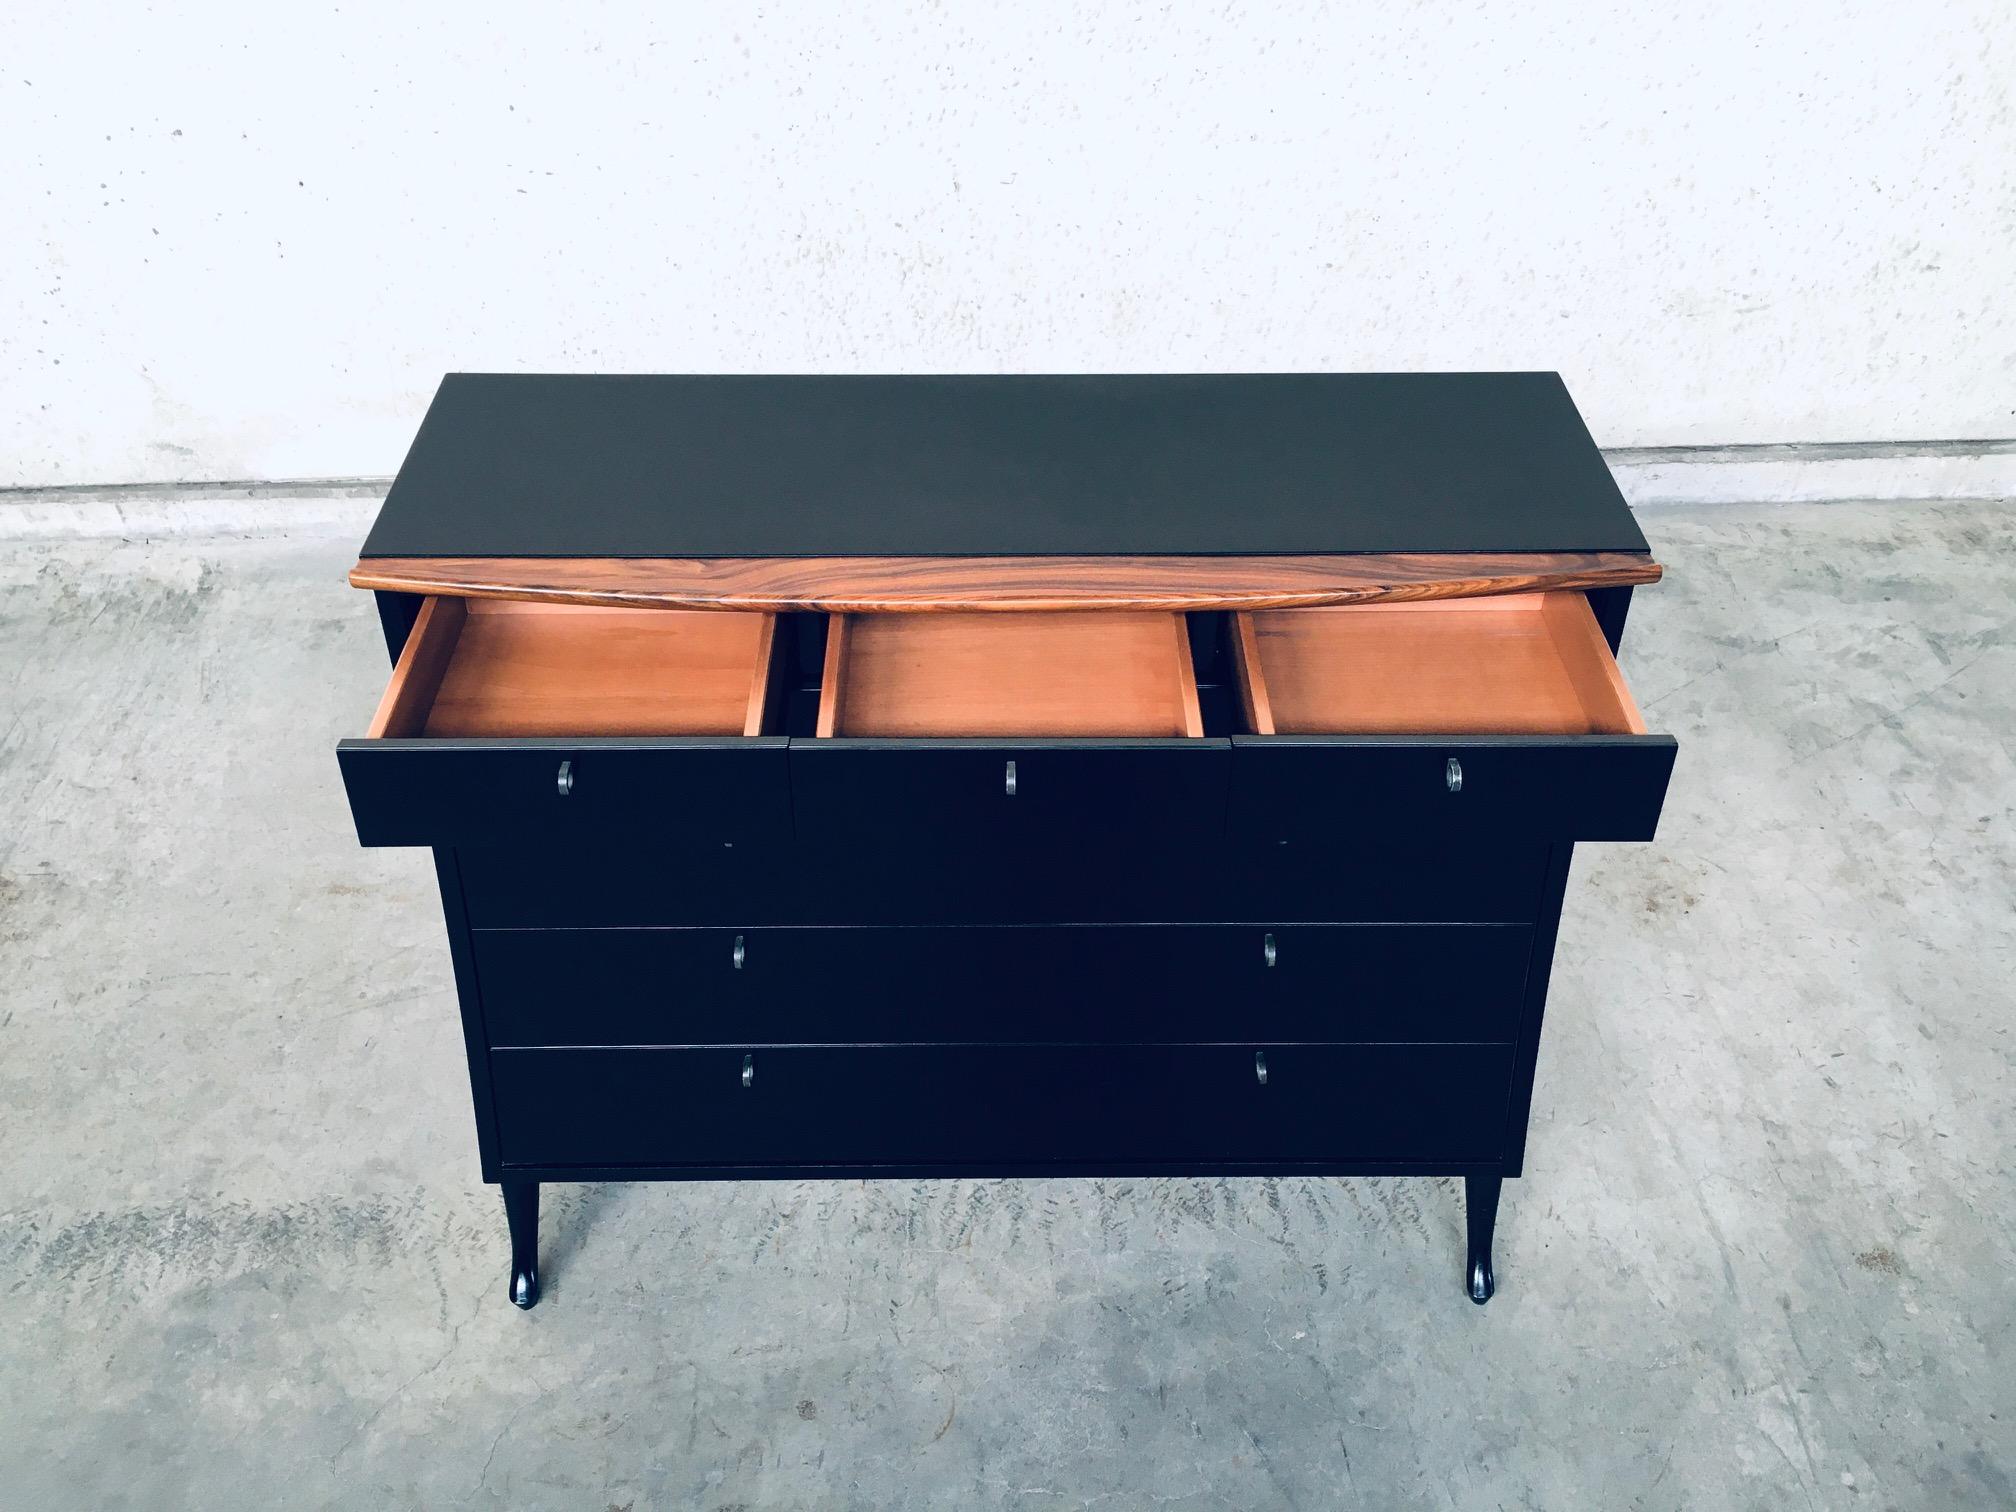 Postmodern Design Chest of Drawers by Umberto Asnago for Giorgetti, Italy 1980's For Sale 6